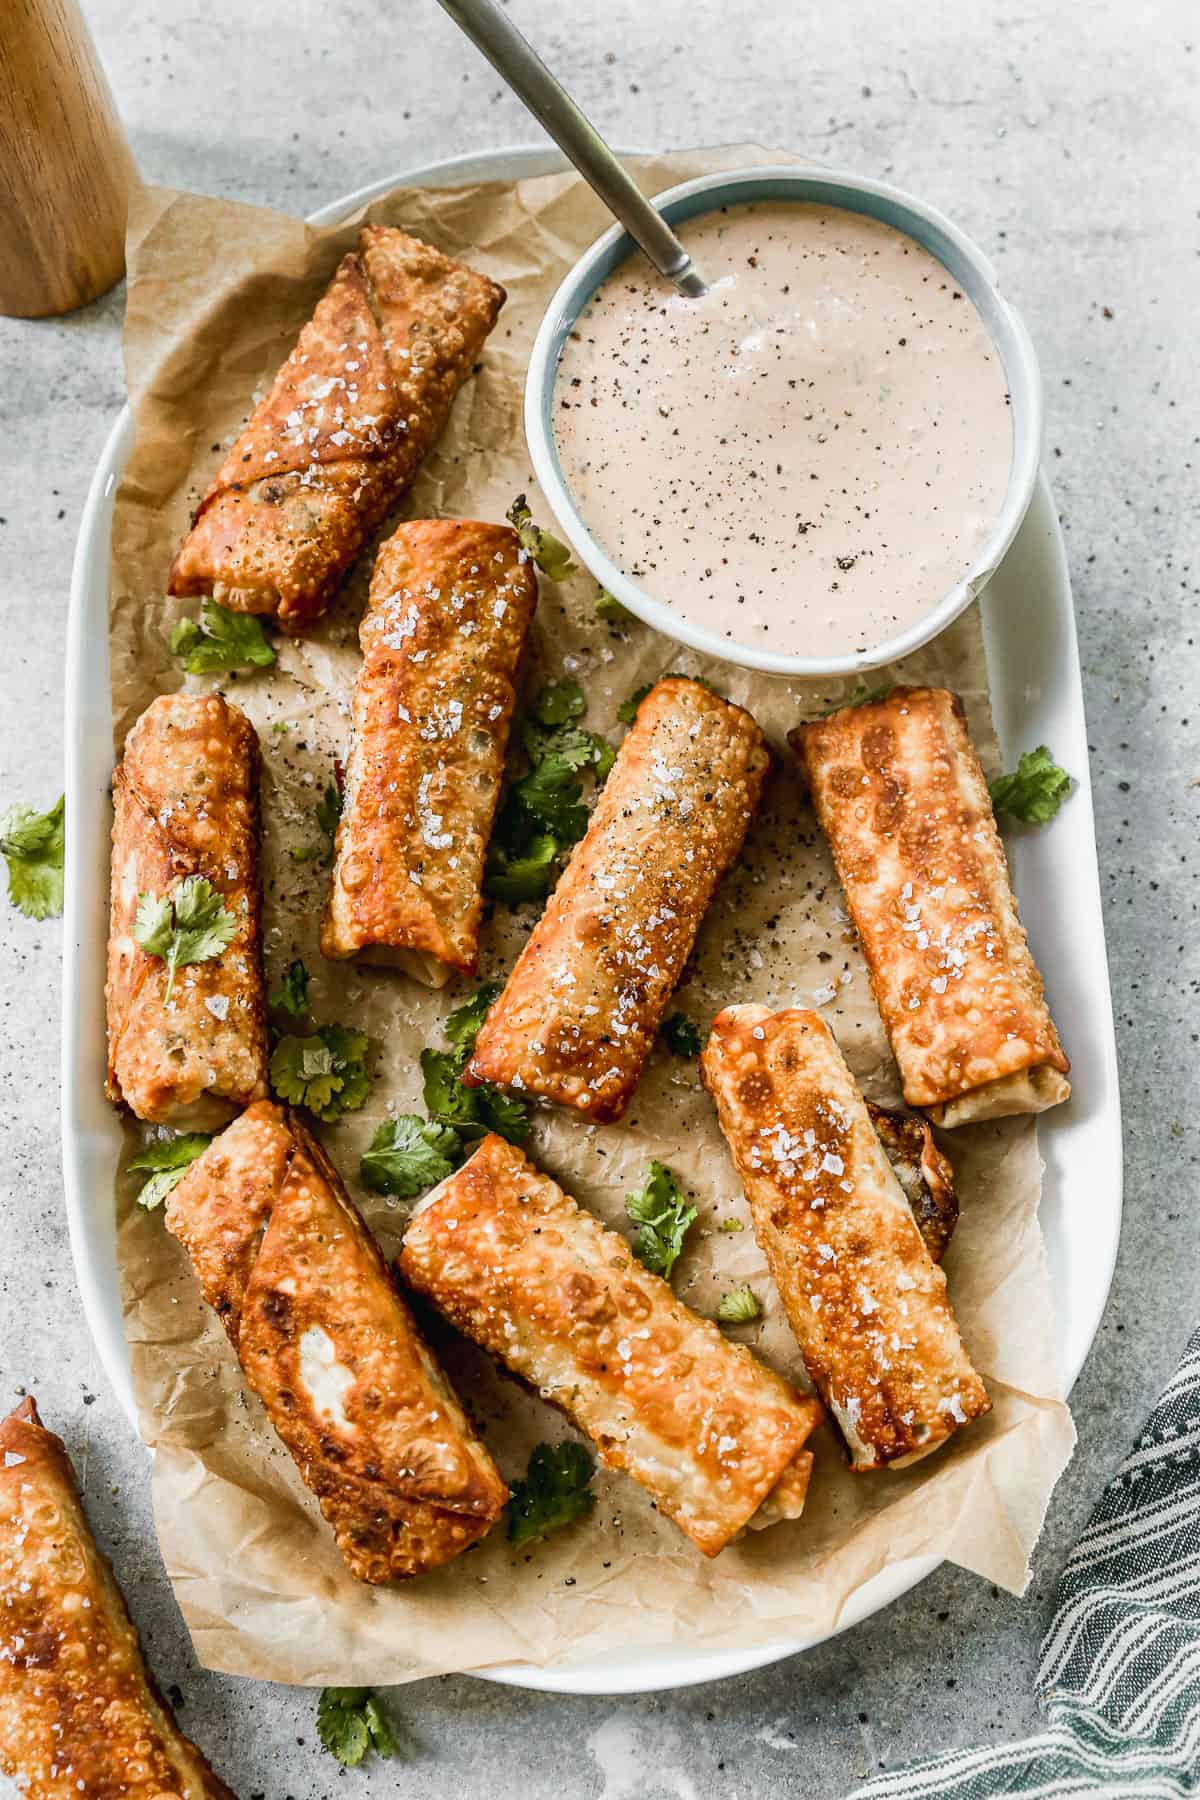 Easy southwest egg rolls on a platter with a homemade dipping sauce, ready to enjoy.